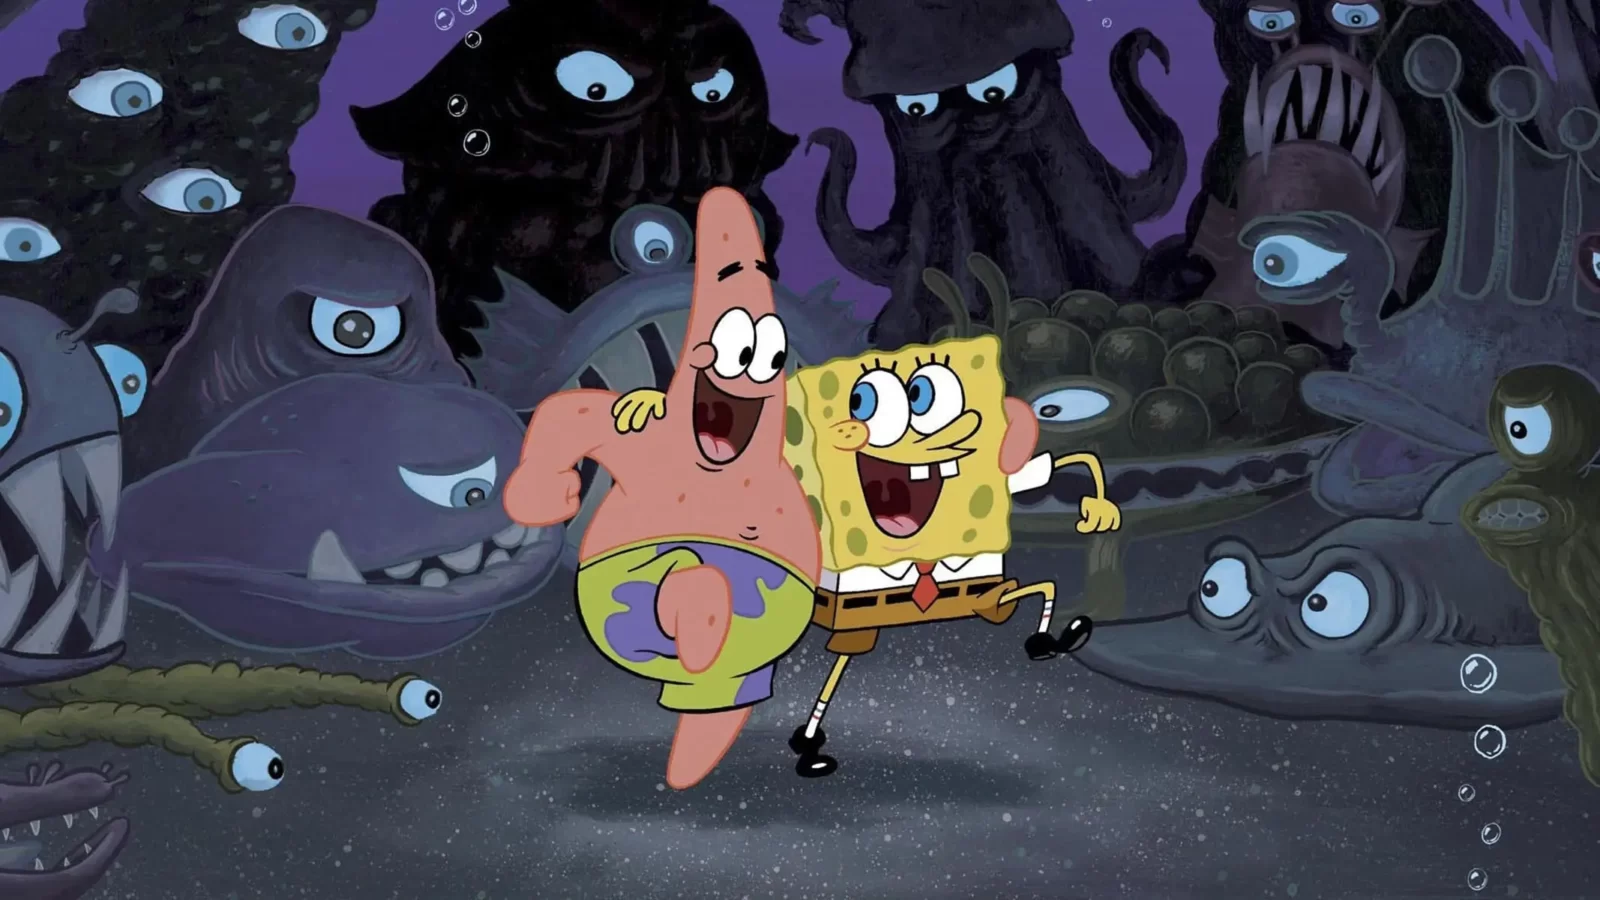 Which SpongeBob Character Are You? Quiz SpongeBob SquarePants in the dark night fear monsters